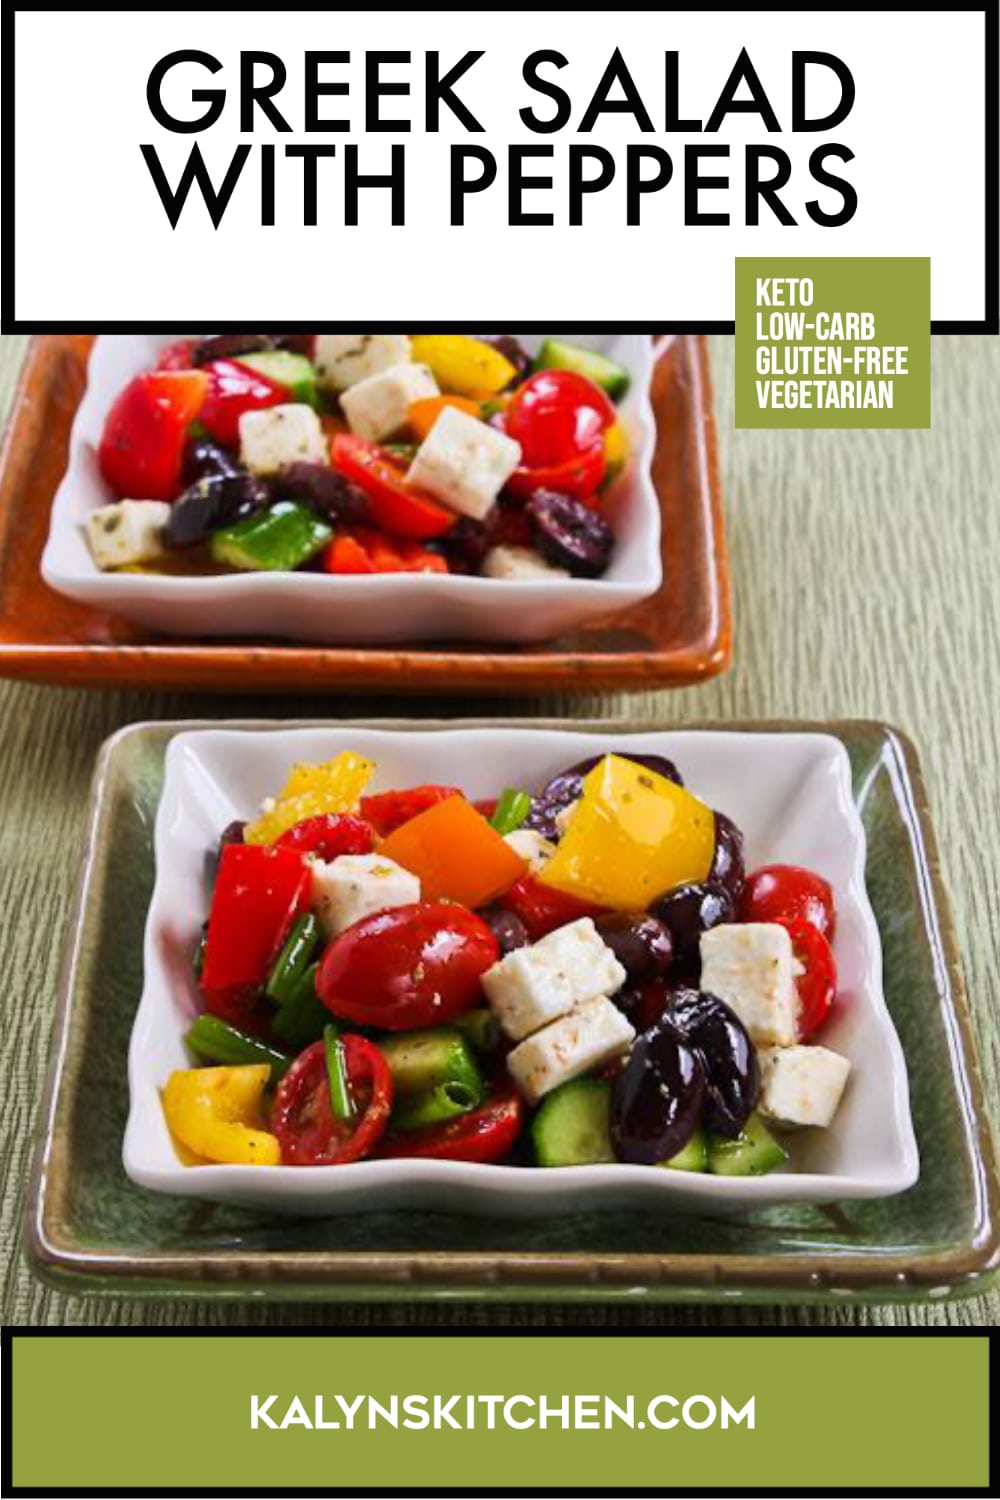 Pinterest image of Greek Salad with Peppers